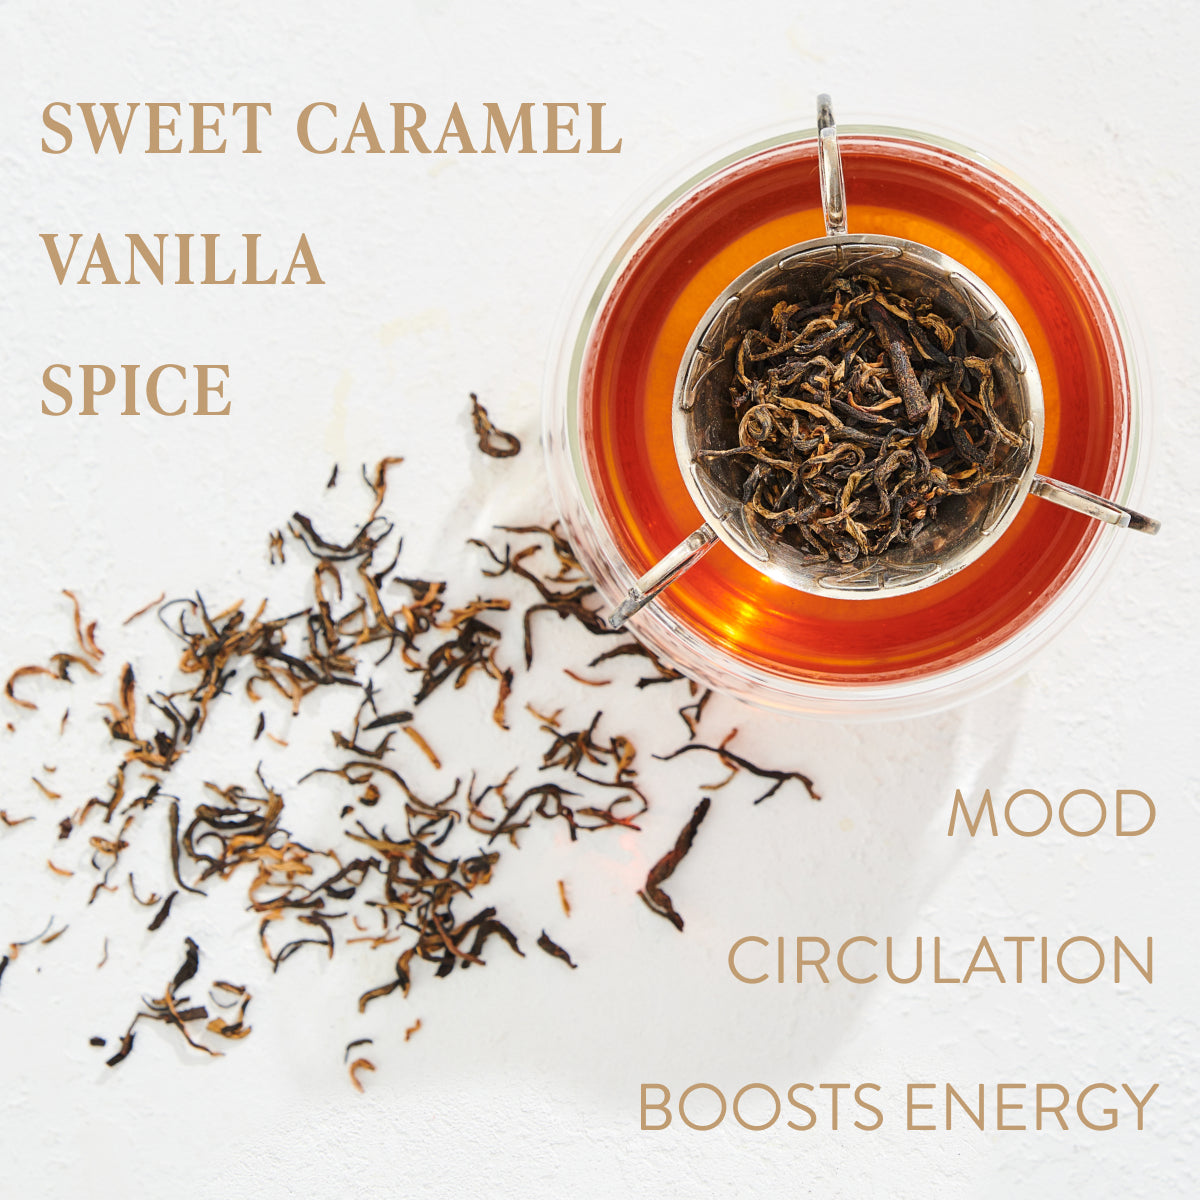 A glass cup of Magic Hour Aquarius: Visionary Goddess Tea with loose tea leaves in a tea infuser. Some tea leaves are scattered on a white surface. The text on the image reads: "Sweet Caramel, Vanilla, Spice" and "Mood, Circulation, Boosts Energy." Enjoy the organic essence in every sip of this loose leaf tea.